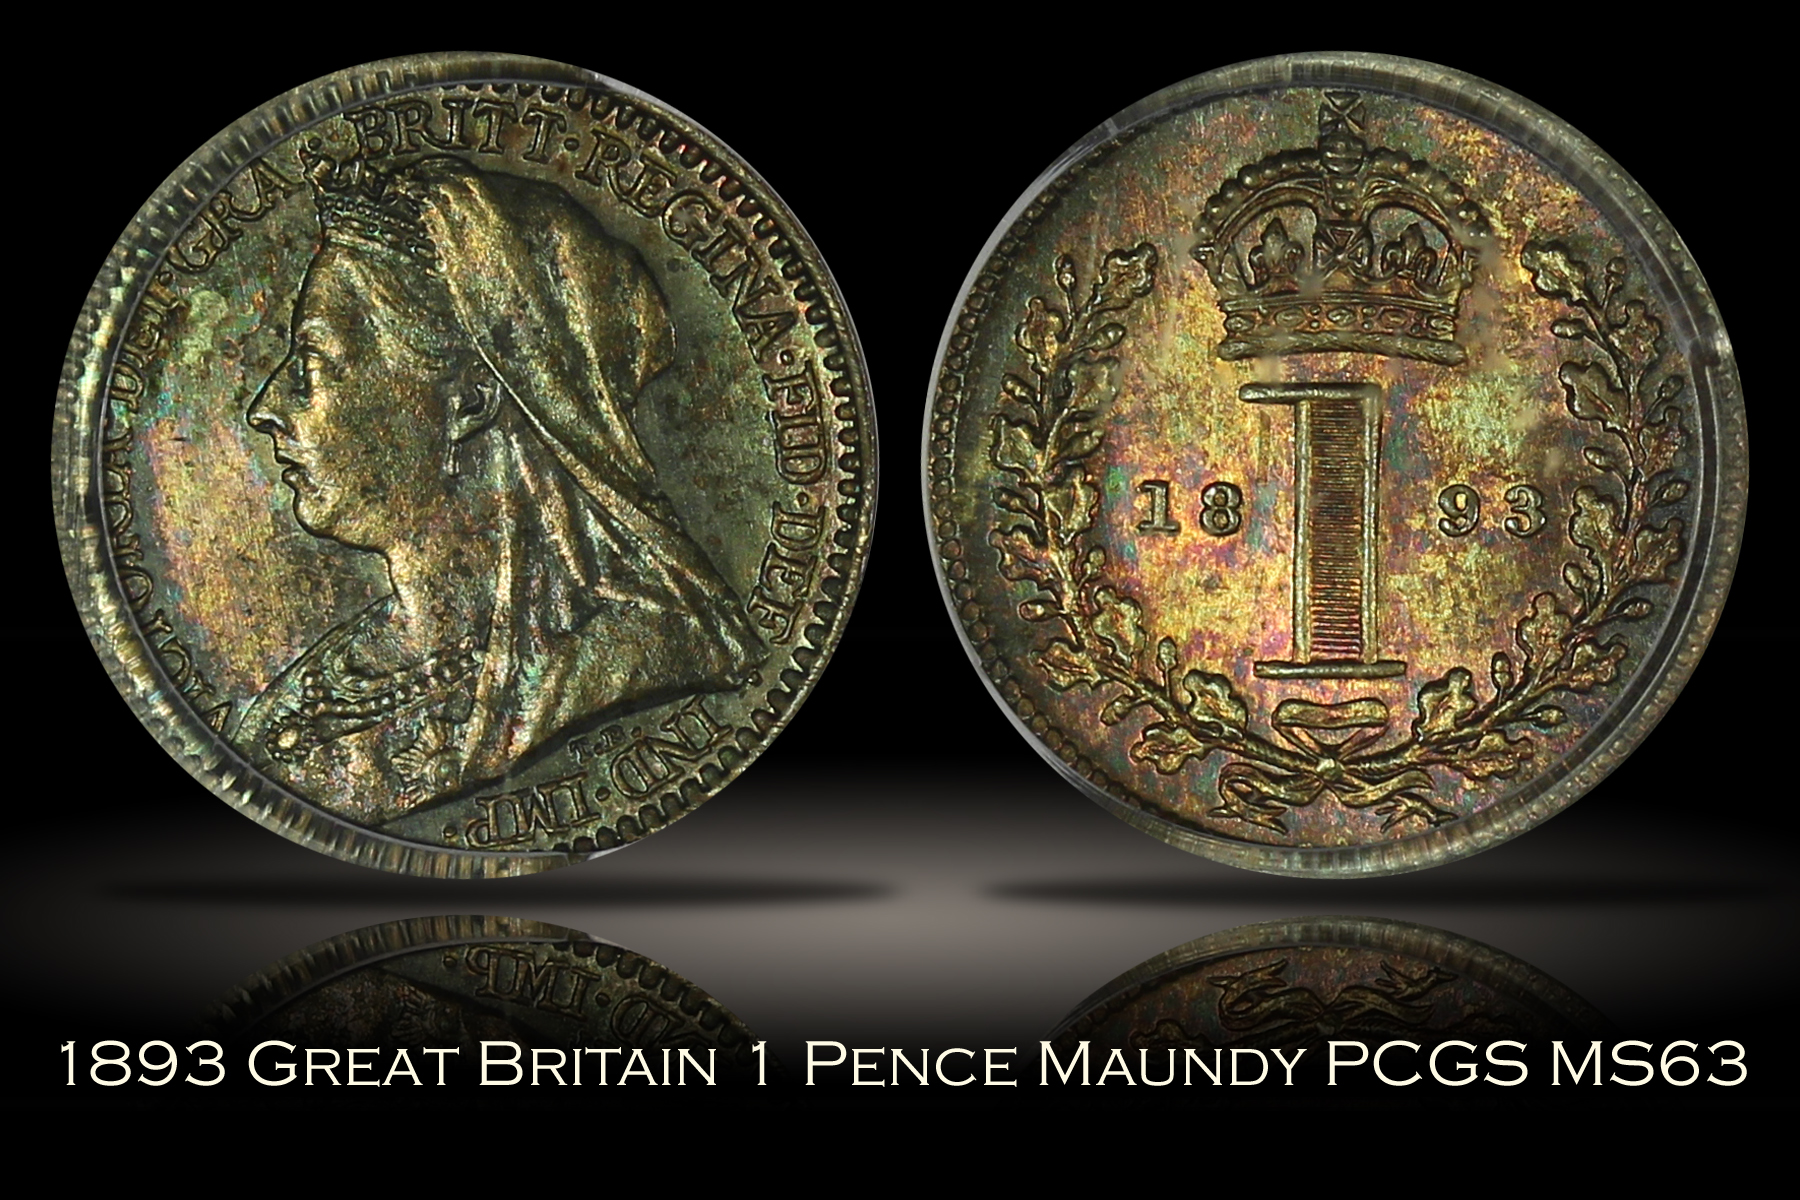 1893 Great Britain 1 Pence Maundy PCGS MS63